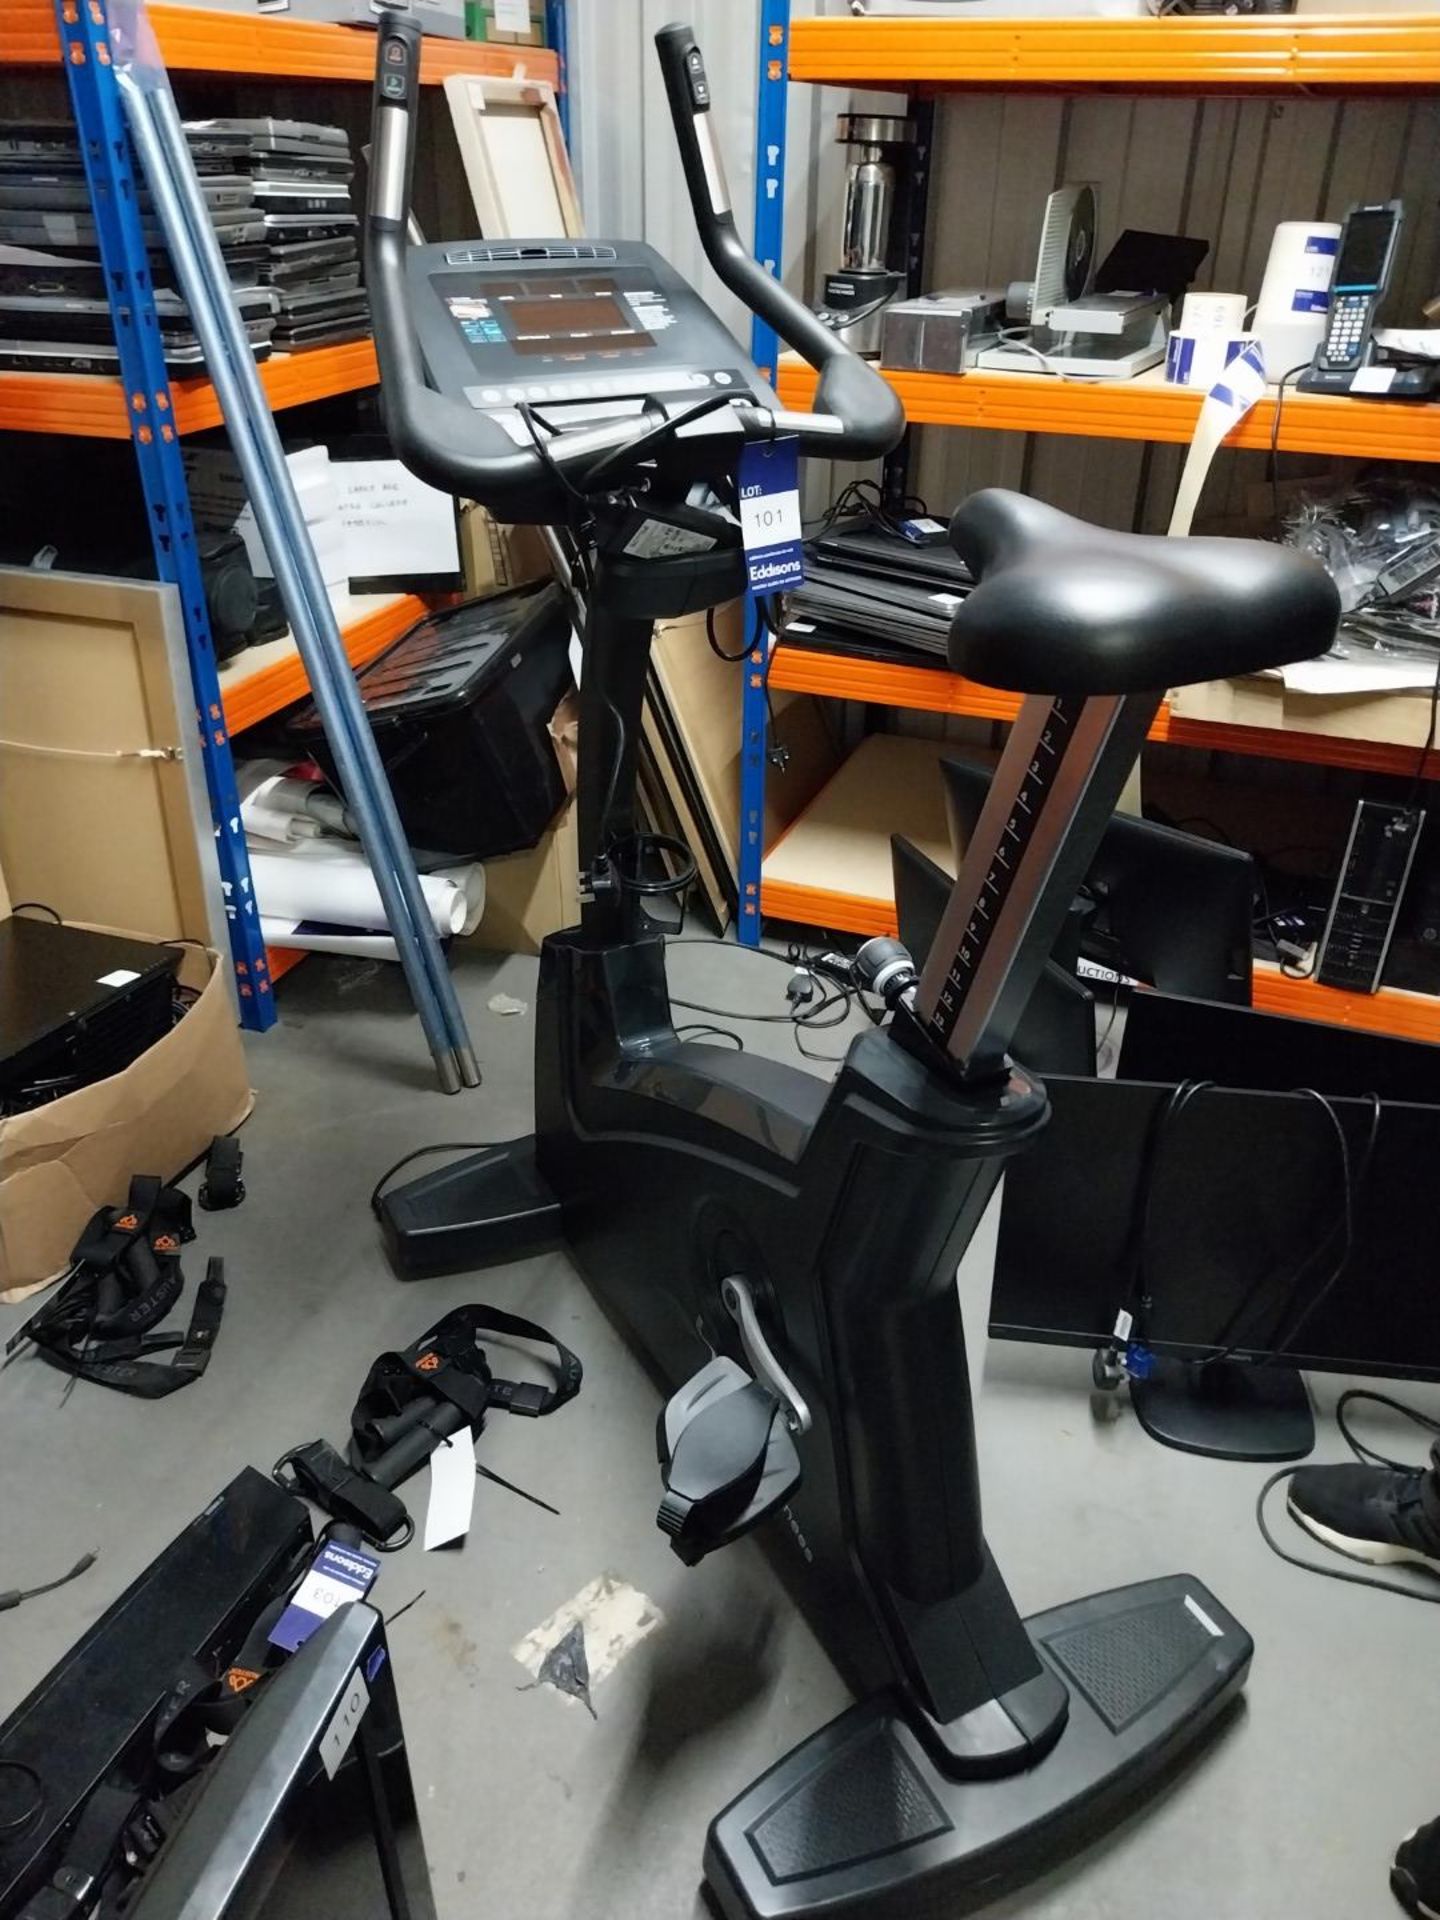 Inspace Fitness LCB22.1 Exercise Bike (located in Leeds)